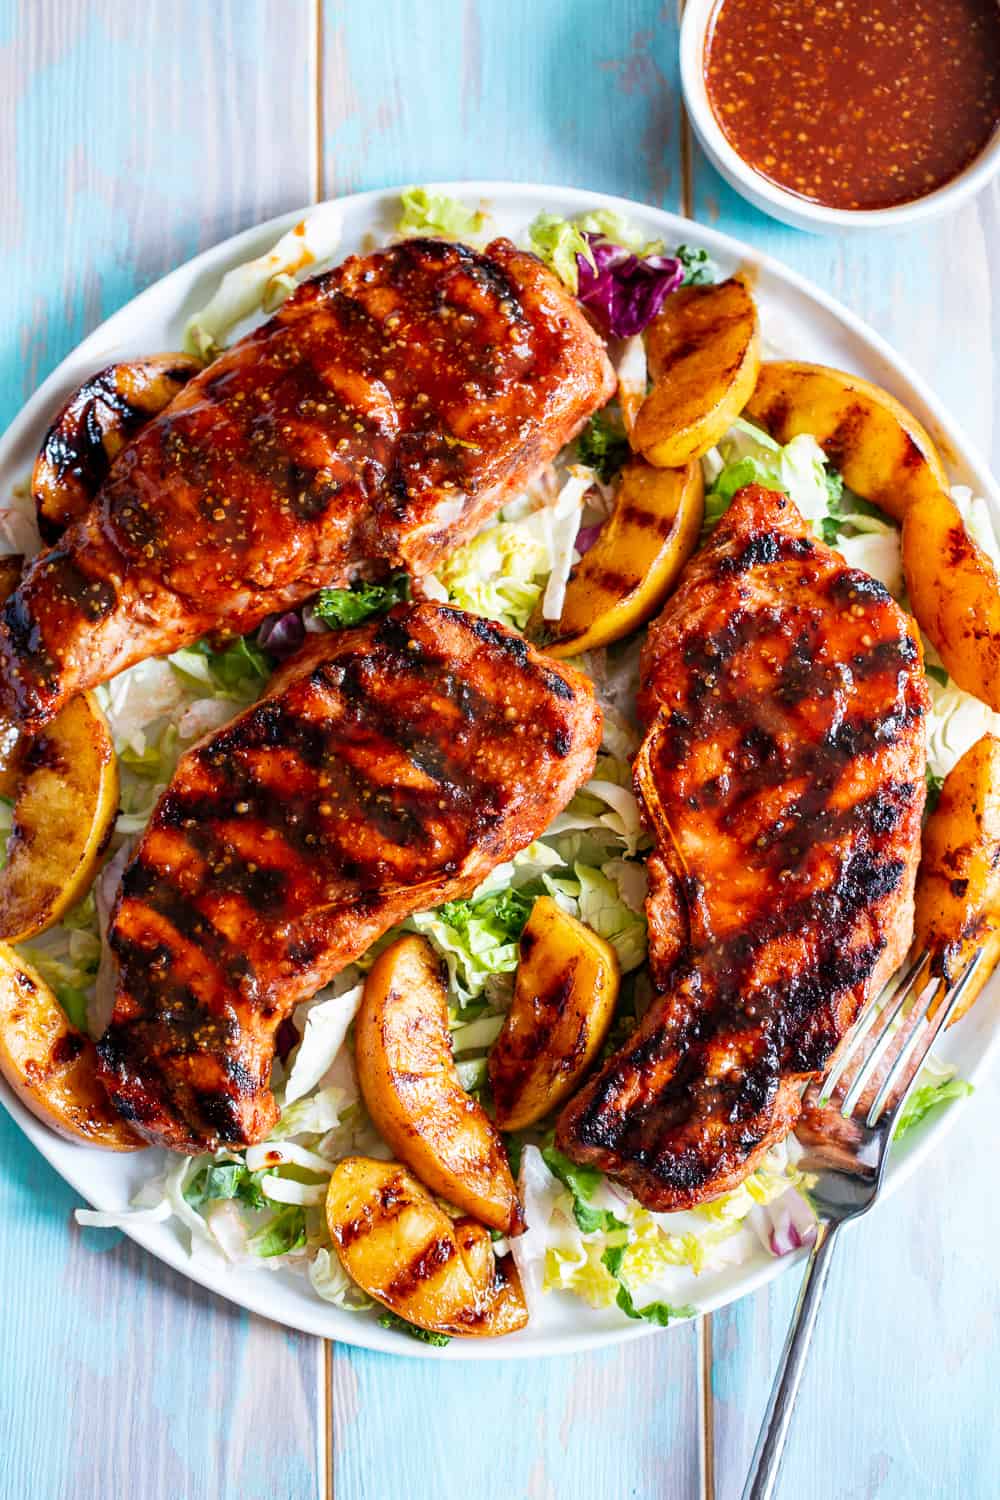 These easy paleo grilled pork chops have a simple and delicious used as both a marinade and dipping sauce for extra flavor.  The peaches add sweet summer flair to the chops which you can serve with any of your favorite sides!  Gluten free, dairy free, soy free, refined sugar free and a Whole30 option.  #paleo #cleaneating #Whole30 #porkchops 